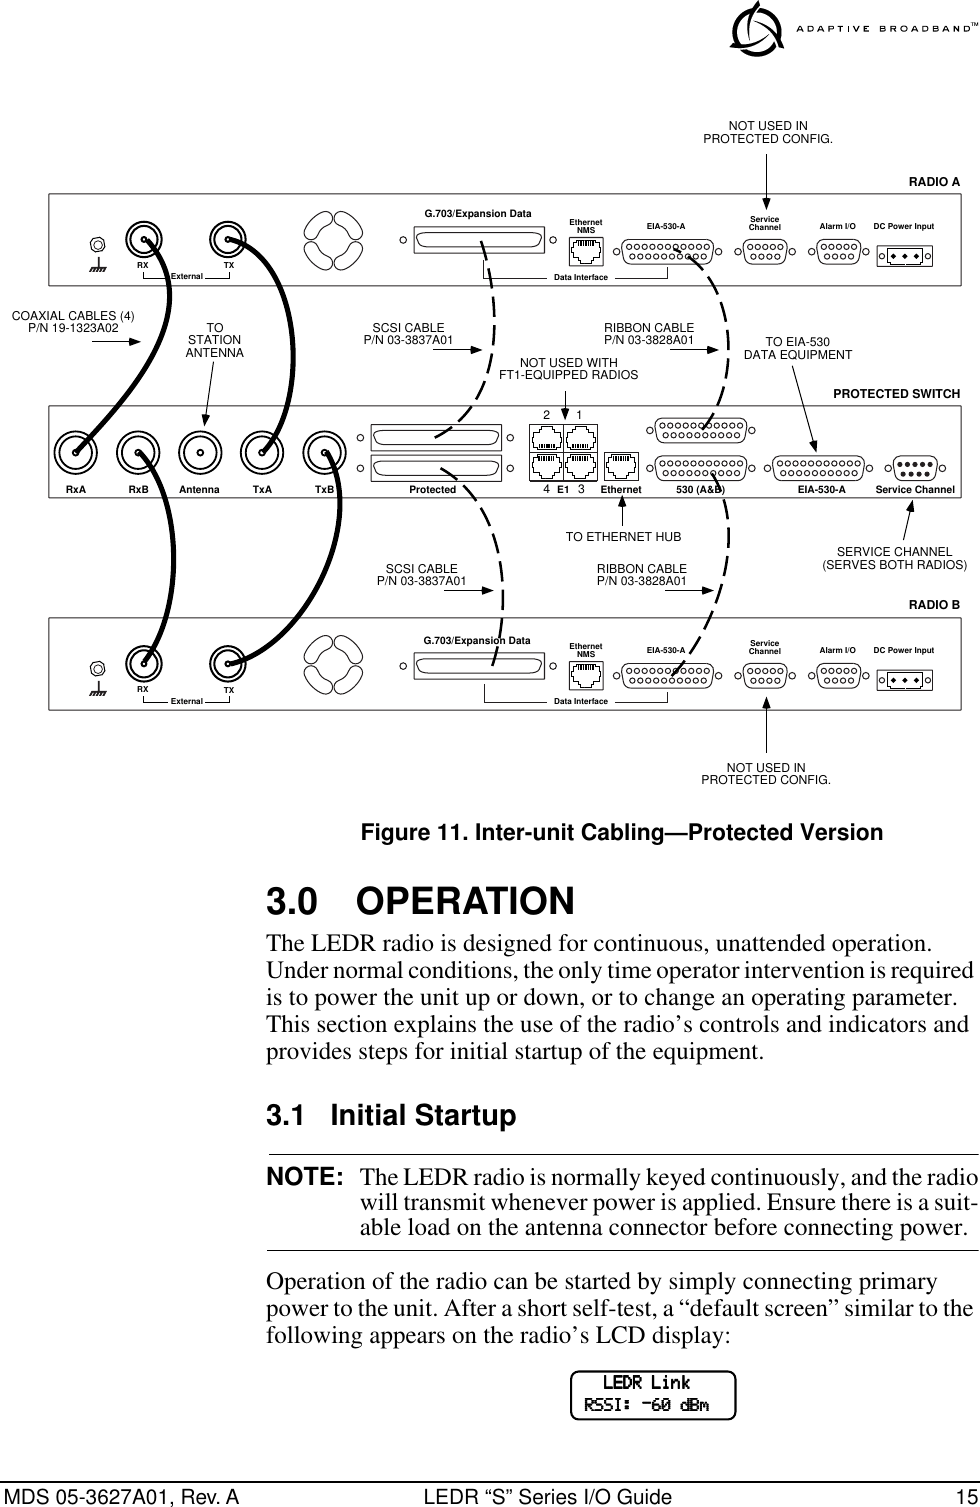 MDS 05-3627A01, Rev. A LEDR “S” Series I/O Guide 15Invisible place holderFigure 11. Inter-unit Cabling—Protected Version3.0 OPERATIONThe LEDR radio is designed for continuous, unattended operation. Under normal conditions, the only time operator intervention is required is to power the unit up or down, or to change an operating parameter. This section explains the use of the radio’s controls and indicators and provides steps for initial startup of the equipment.3.1 Initial StartupNOTE: The LEDR radio is normally keyed continuously, and the radiowill transmit whenever power is applied. Ensure there is a suit-able load on the antenna connector before connecting power.Operation of the radio can be started by simply connecting primary power to the unit. After a short self-test, a “default screen” similar to the following appears on the radio’s LCD display:TxBAntenna TxARxBRxA 530 (A&amp;B) EIA-530-A Service ChannelEthernetE1ProtectedTXExternal Data InterfaceEIA-530-AEthernetNMSServiceChannel Alarm I/O DC Power InputEIA-530-AEthernetNMSData InterfaceServiceChannel Alarm I/O DC Power InputTOSTATIONANTENNA1234NOT USED WITHFT1-EQUIPPED RADIOSTO ETHERNET HUBTO EIA-530DATA EQUIPMENTSERVICE CHANNEL(SERVES BOTH RADIOS)RXCOAXIAL CABLES (4)P/N 19-1323A02 RIBBON CABLEP/N 03-3828A01SCSI CABLEP/N 03-3837A01TXExternalRXG.703/Expansion DataG.703/Expansion DataNOT USED INPROTECTED CONFIG.NOT USED INPROTECTED CONFIG.RADIO ARADIO BPROTECTED SWITCHRIBBON CABLEP/N 03-3828A01SCSI CABLEP/N 03-3837A01            LLLLEEEEDDDDRRRR    LLLLiiiinnnnkkkk                    RRRRSSSSSSSSIIII::::    ----66660000    ddddBBBBmmmm